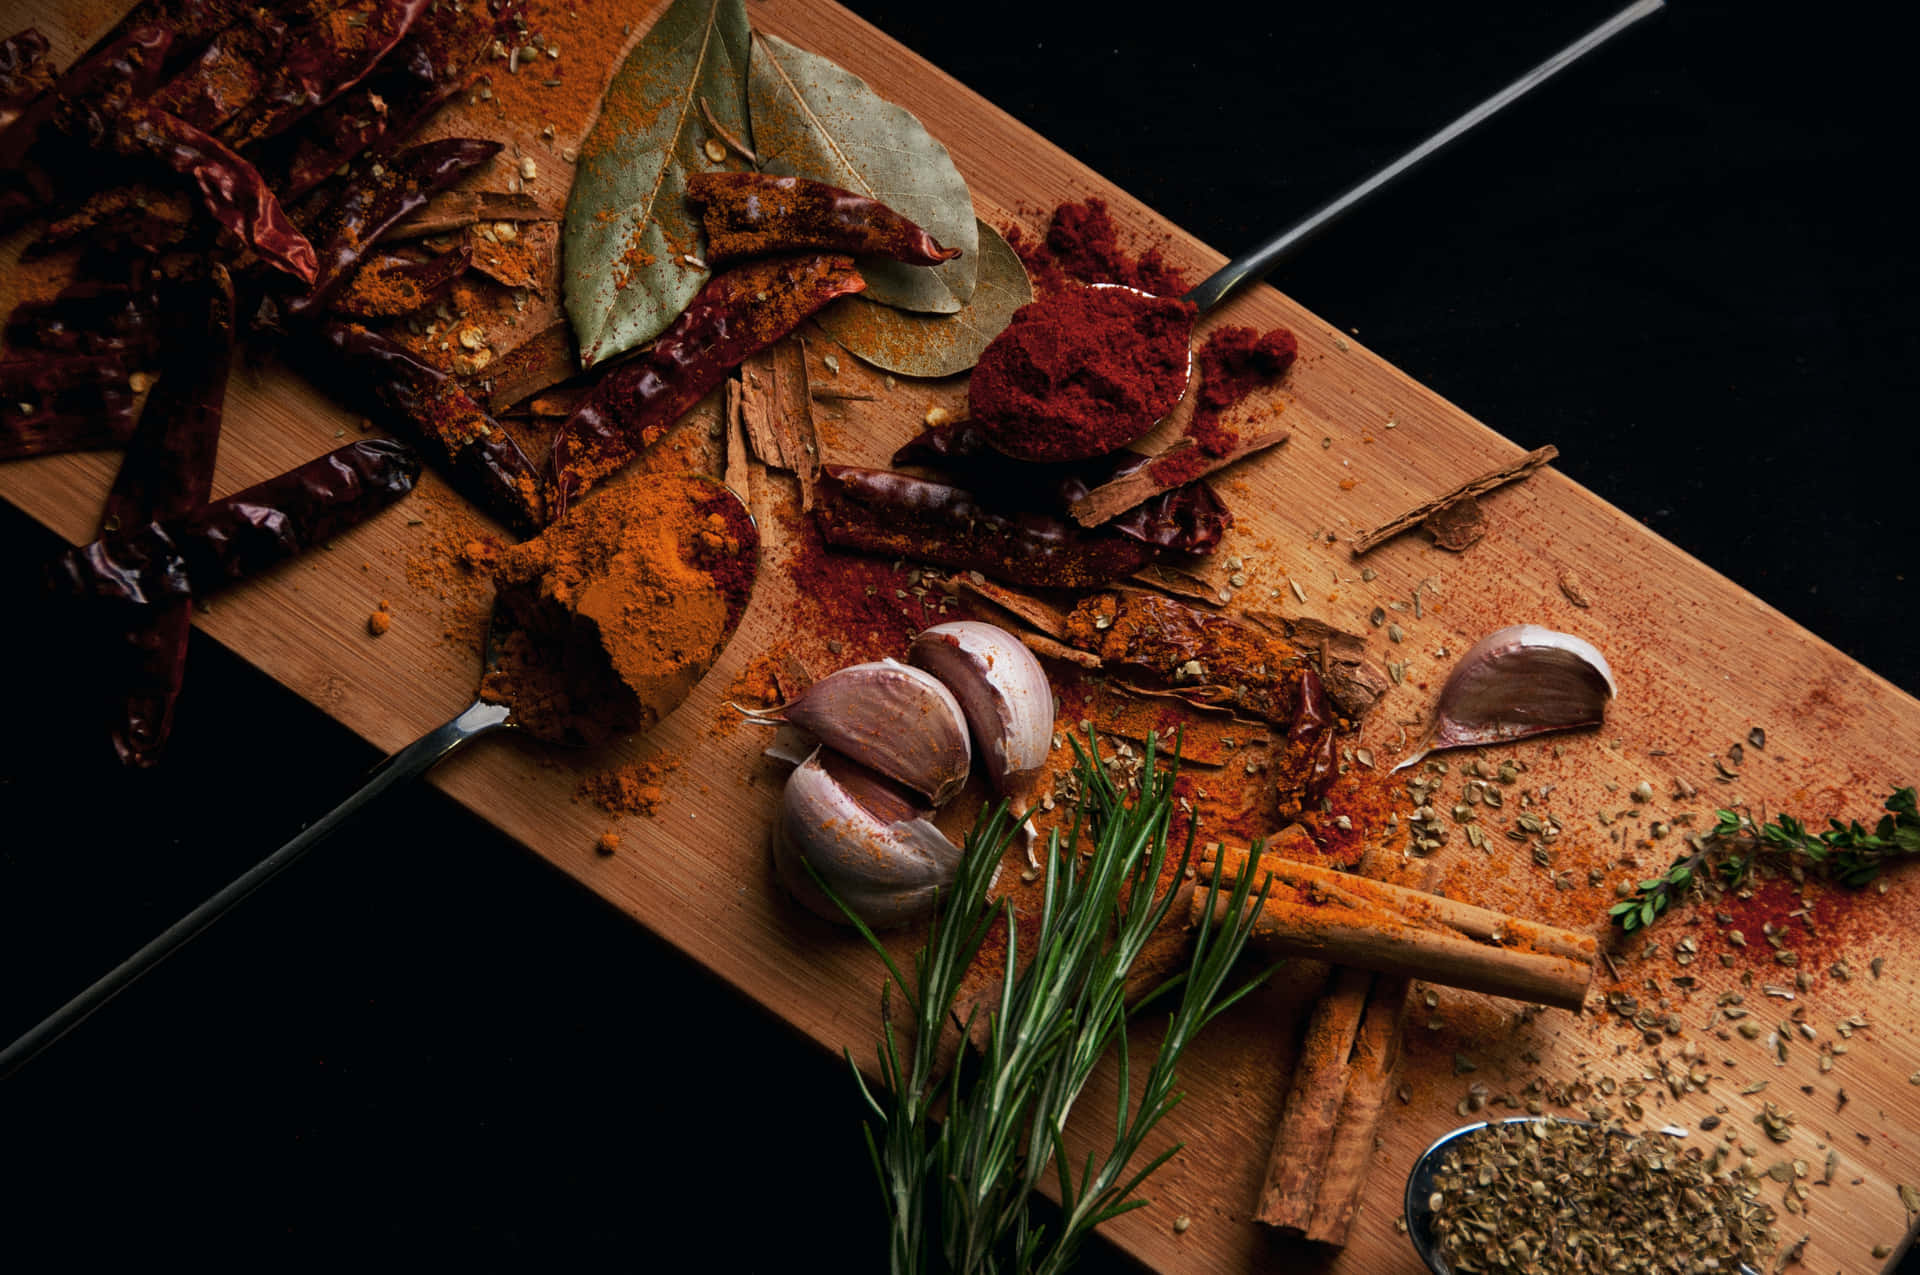 Enjoy the amazing aromas and flavours of the world's most unique spices.